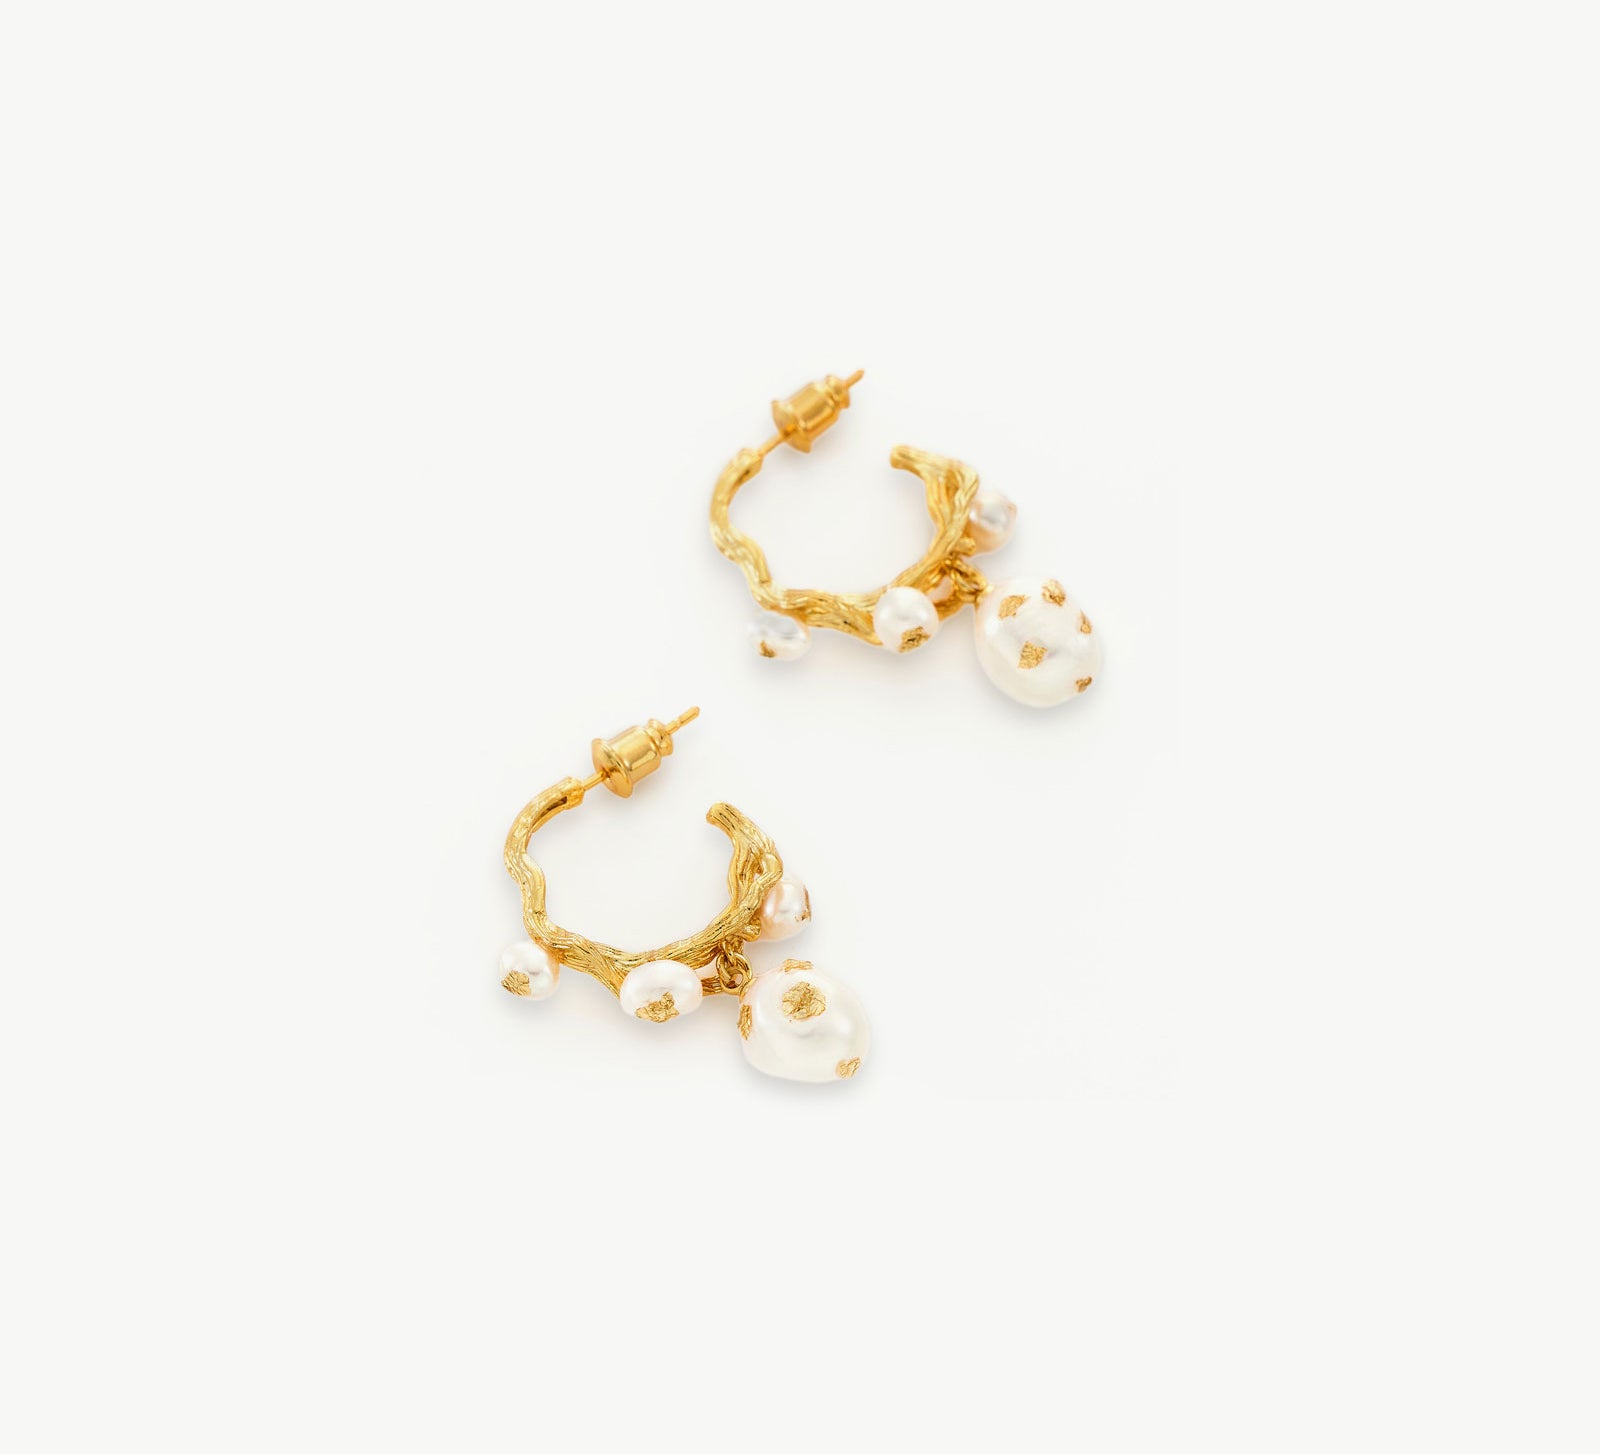 Baroque Pearl Drop Earrings, a stunning display of baroque pearls that exude timeless elegance, making these earrings a classic and sophisticated accessory.